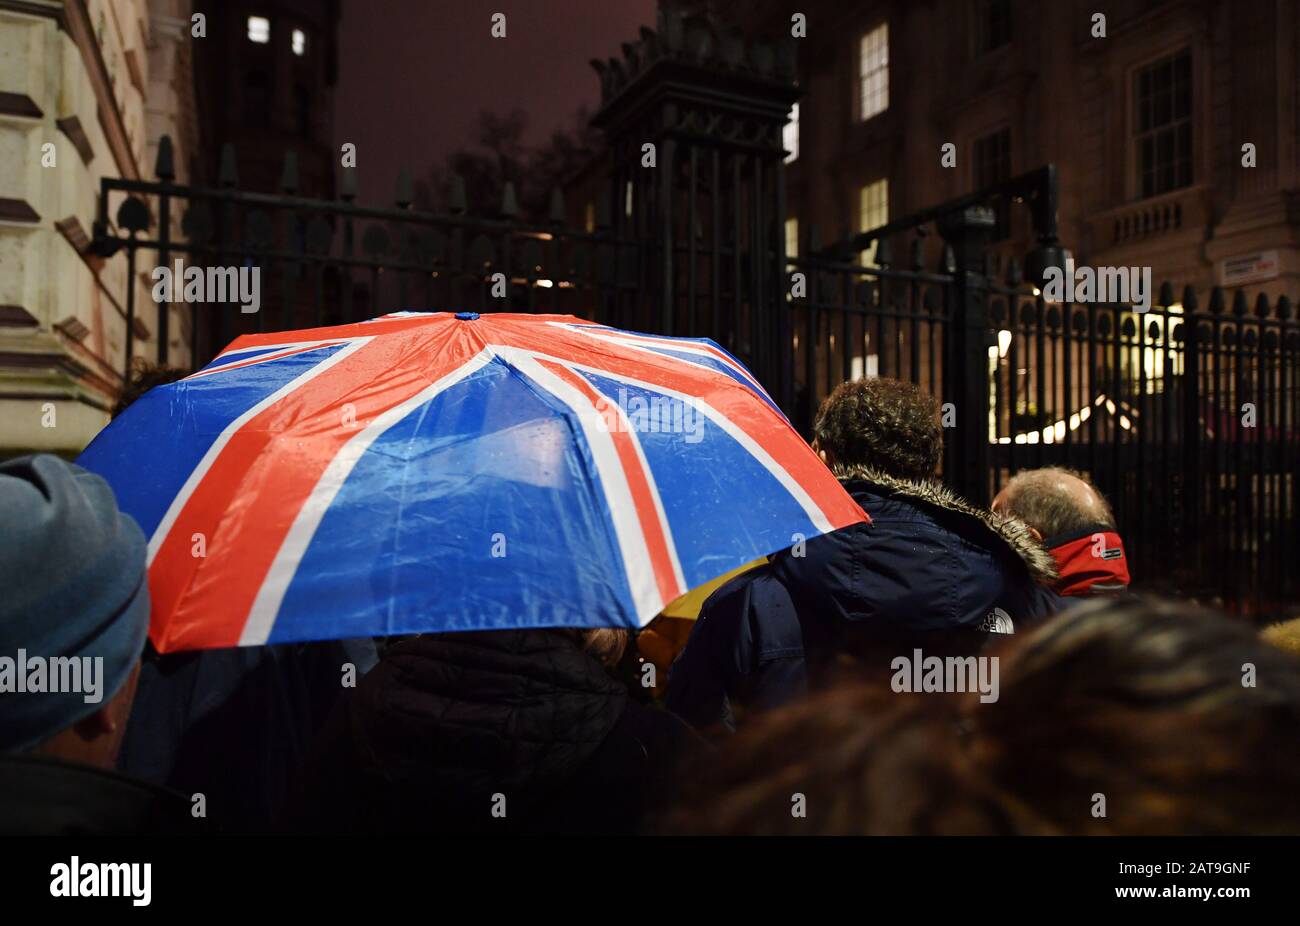 Whitehall, London, UK. 31st January 2020. Crowds gather at the entrance into Downing Street to mark the UK leaving the EU at 11.00pm. Credit: Malcolm Park/Alamy Live News. Stock Photo